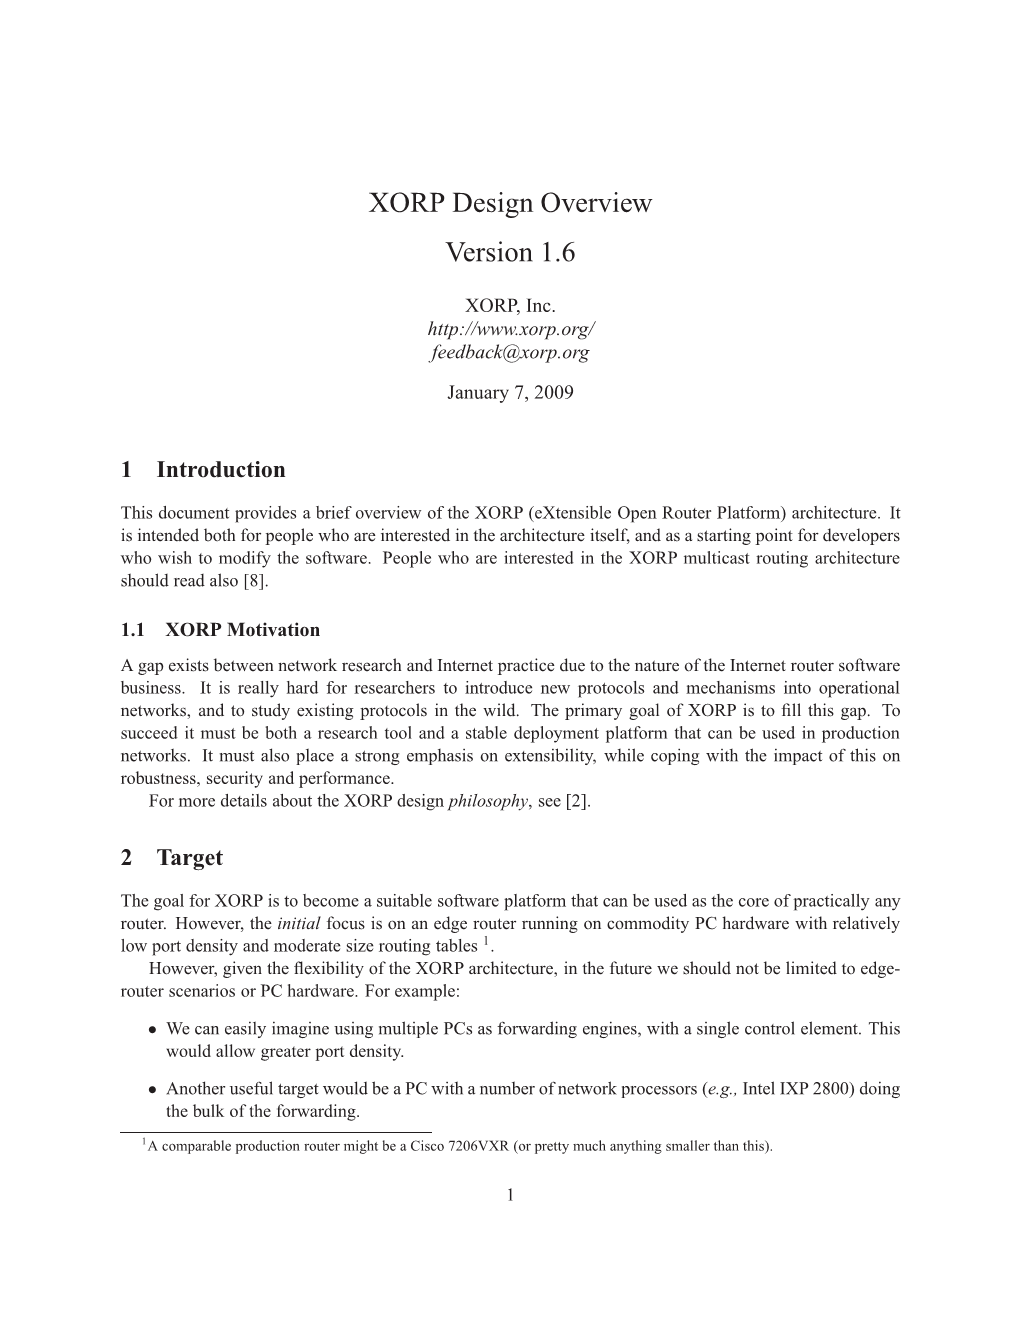 XORP Design Overview Version 1.6